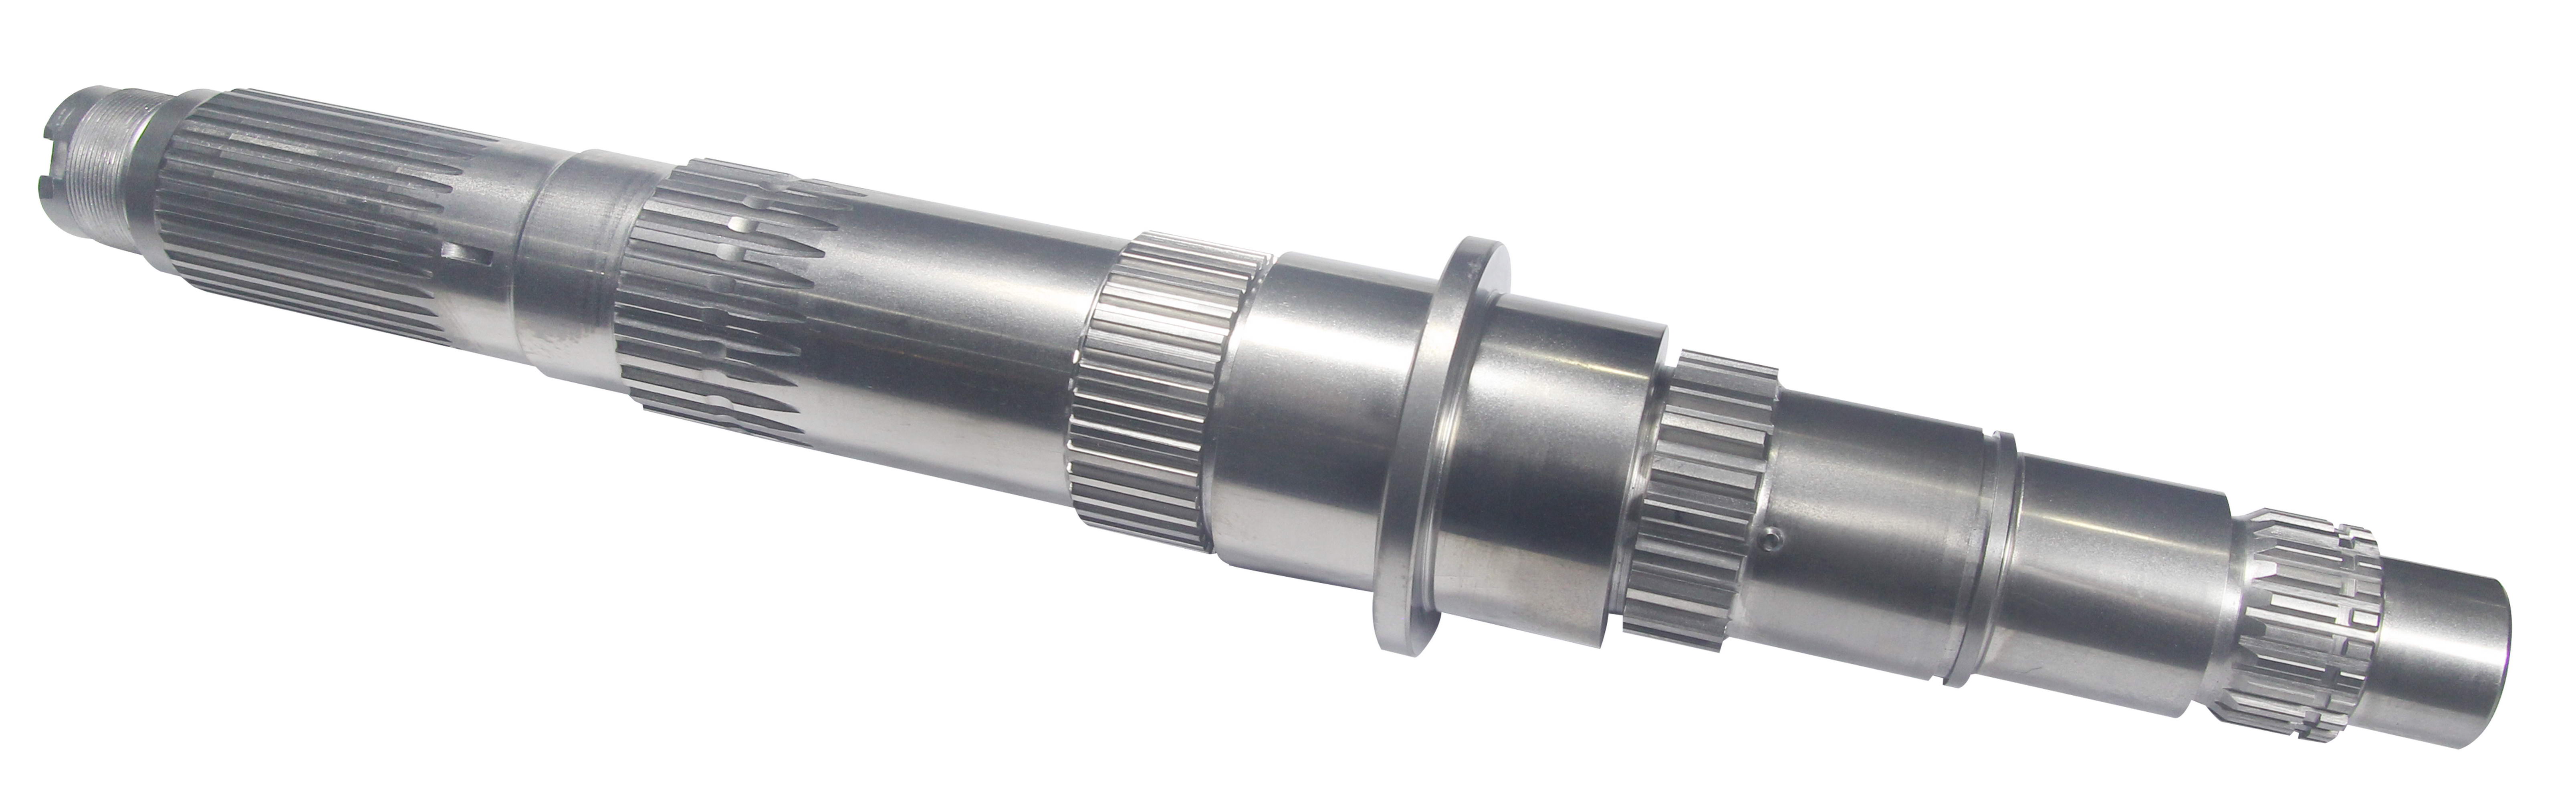 Gearbox Counter Shaft For Hino